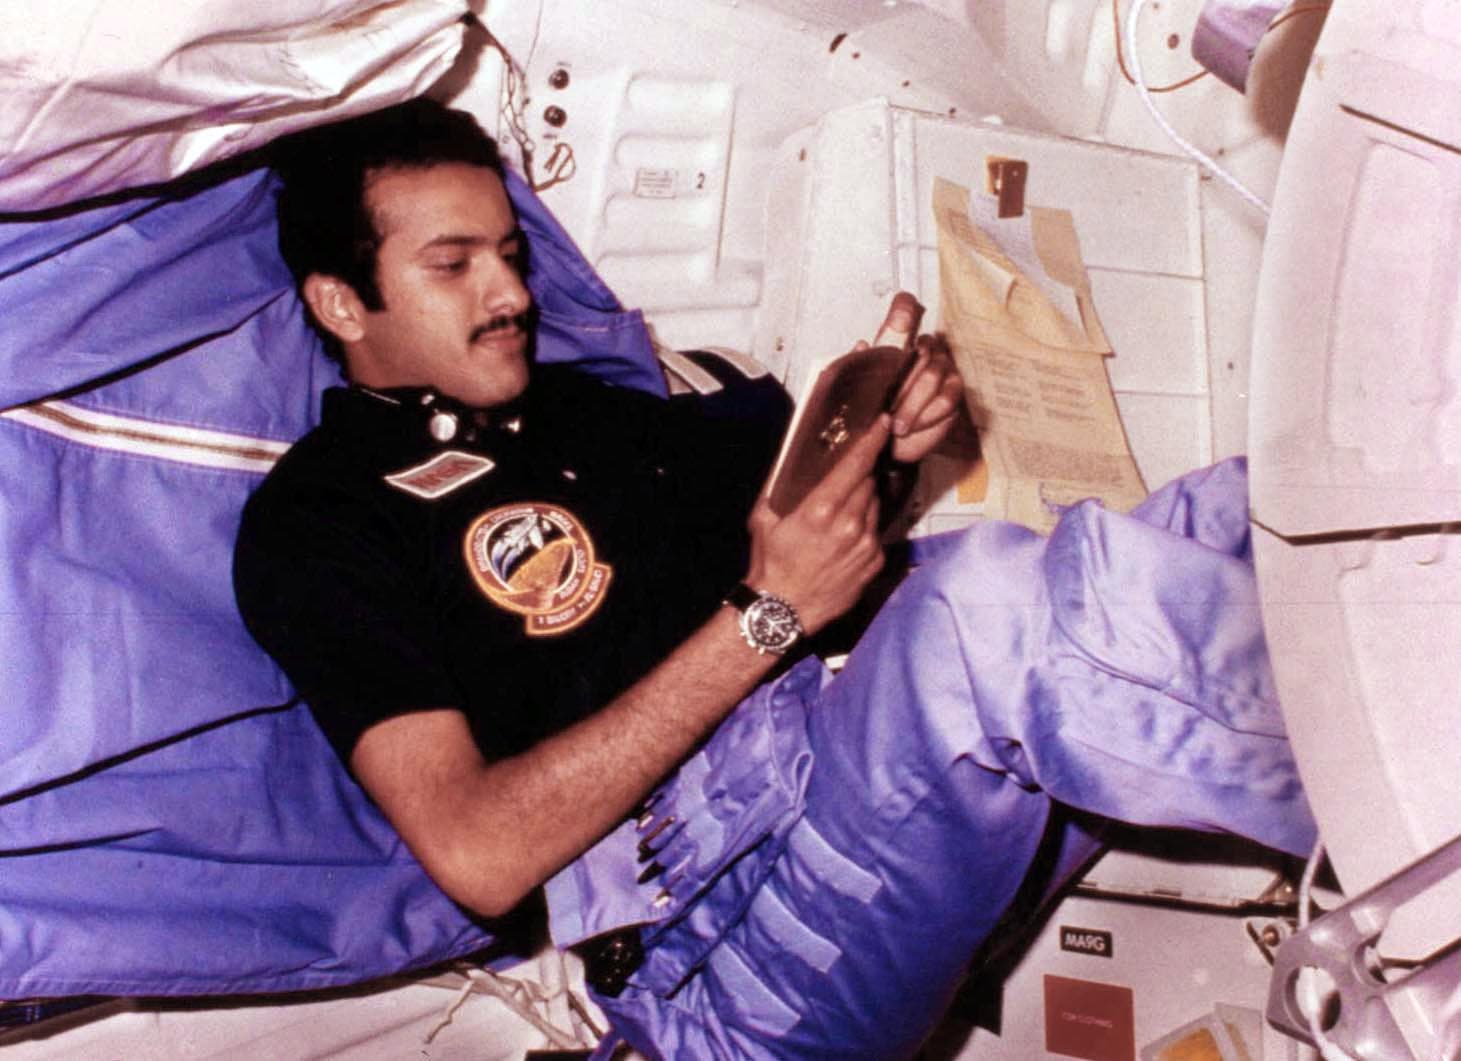 Prince sultan reading the Quran in space aboard the Discovery shuttle. (Supplied)